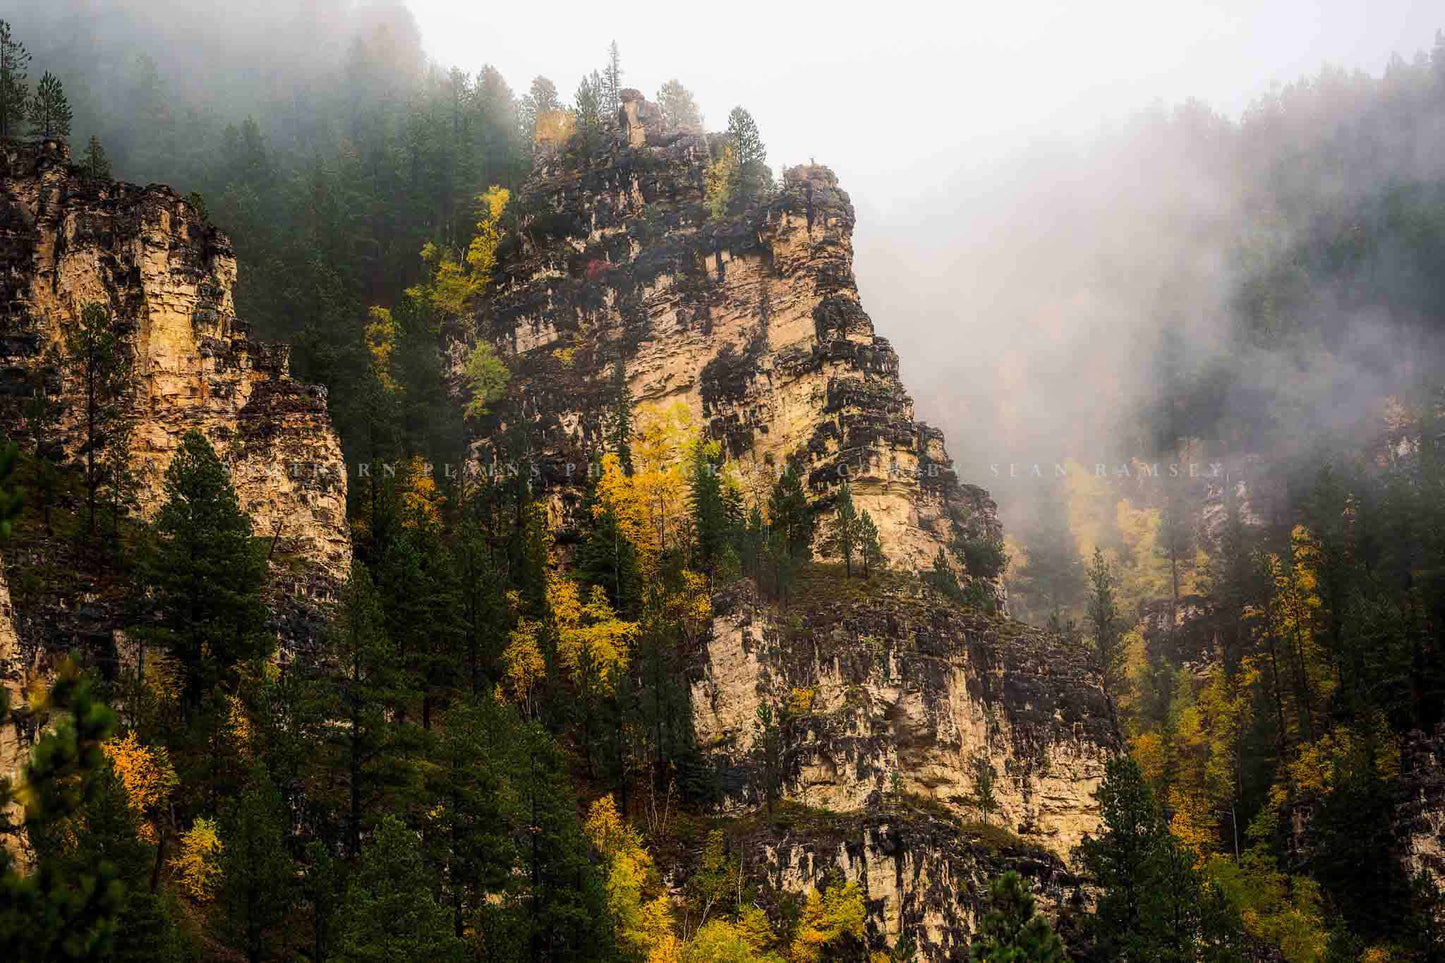 Black Hills landscape photography print of Spearfish Canyon walls shrouded in fog on an autumn day in South Dakota by Sean Ramsey of Southern Plains Photography.